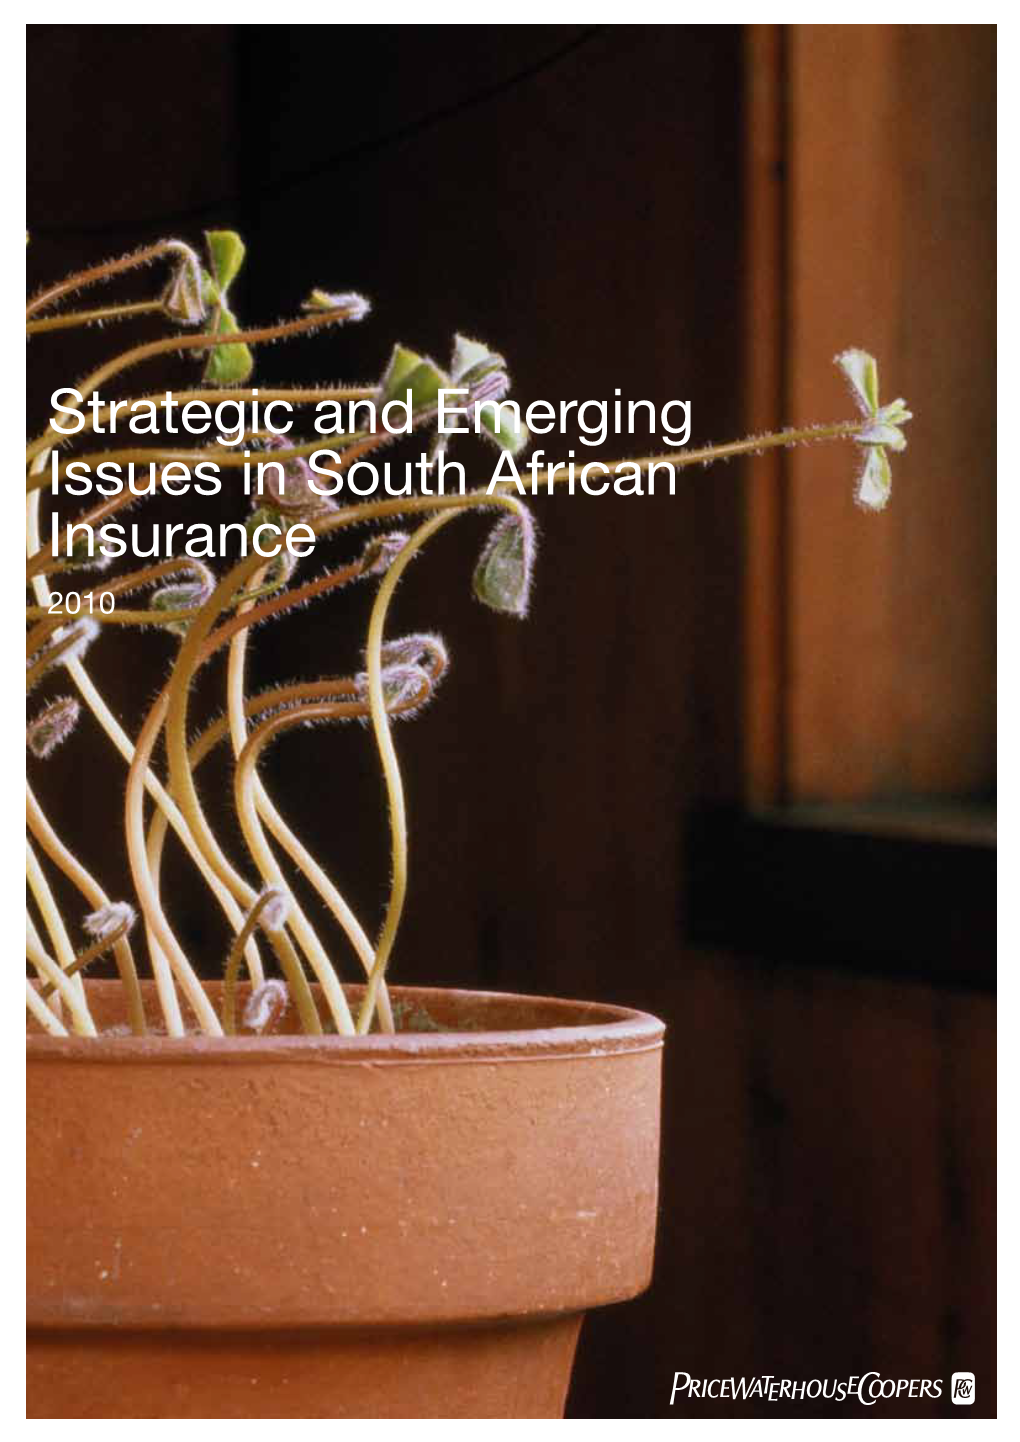 Strategic and Emerging Issues in South African Insurance 2010 Contents